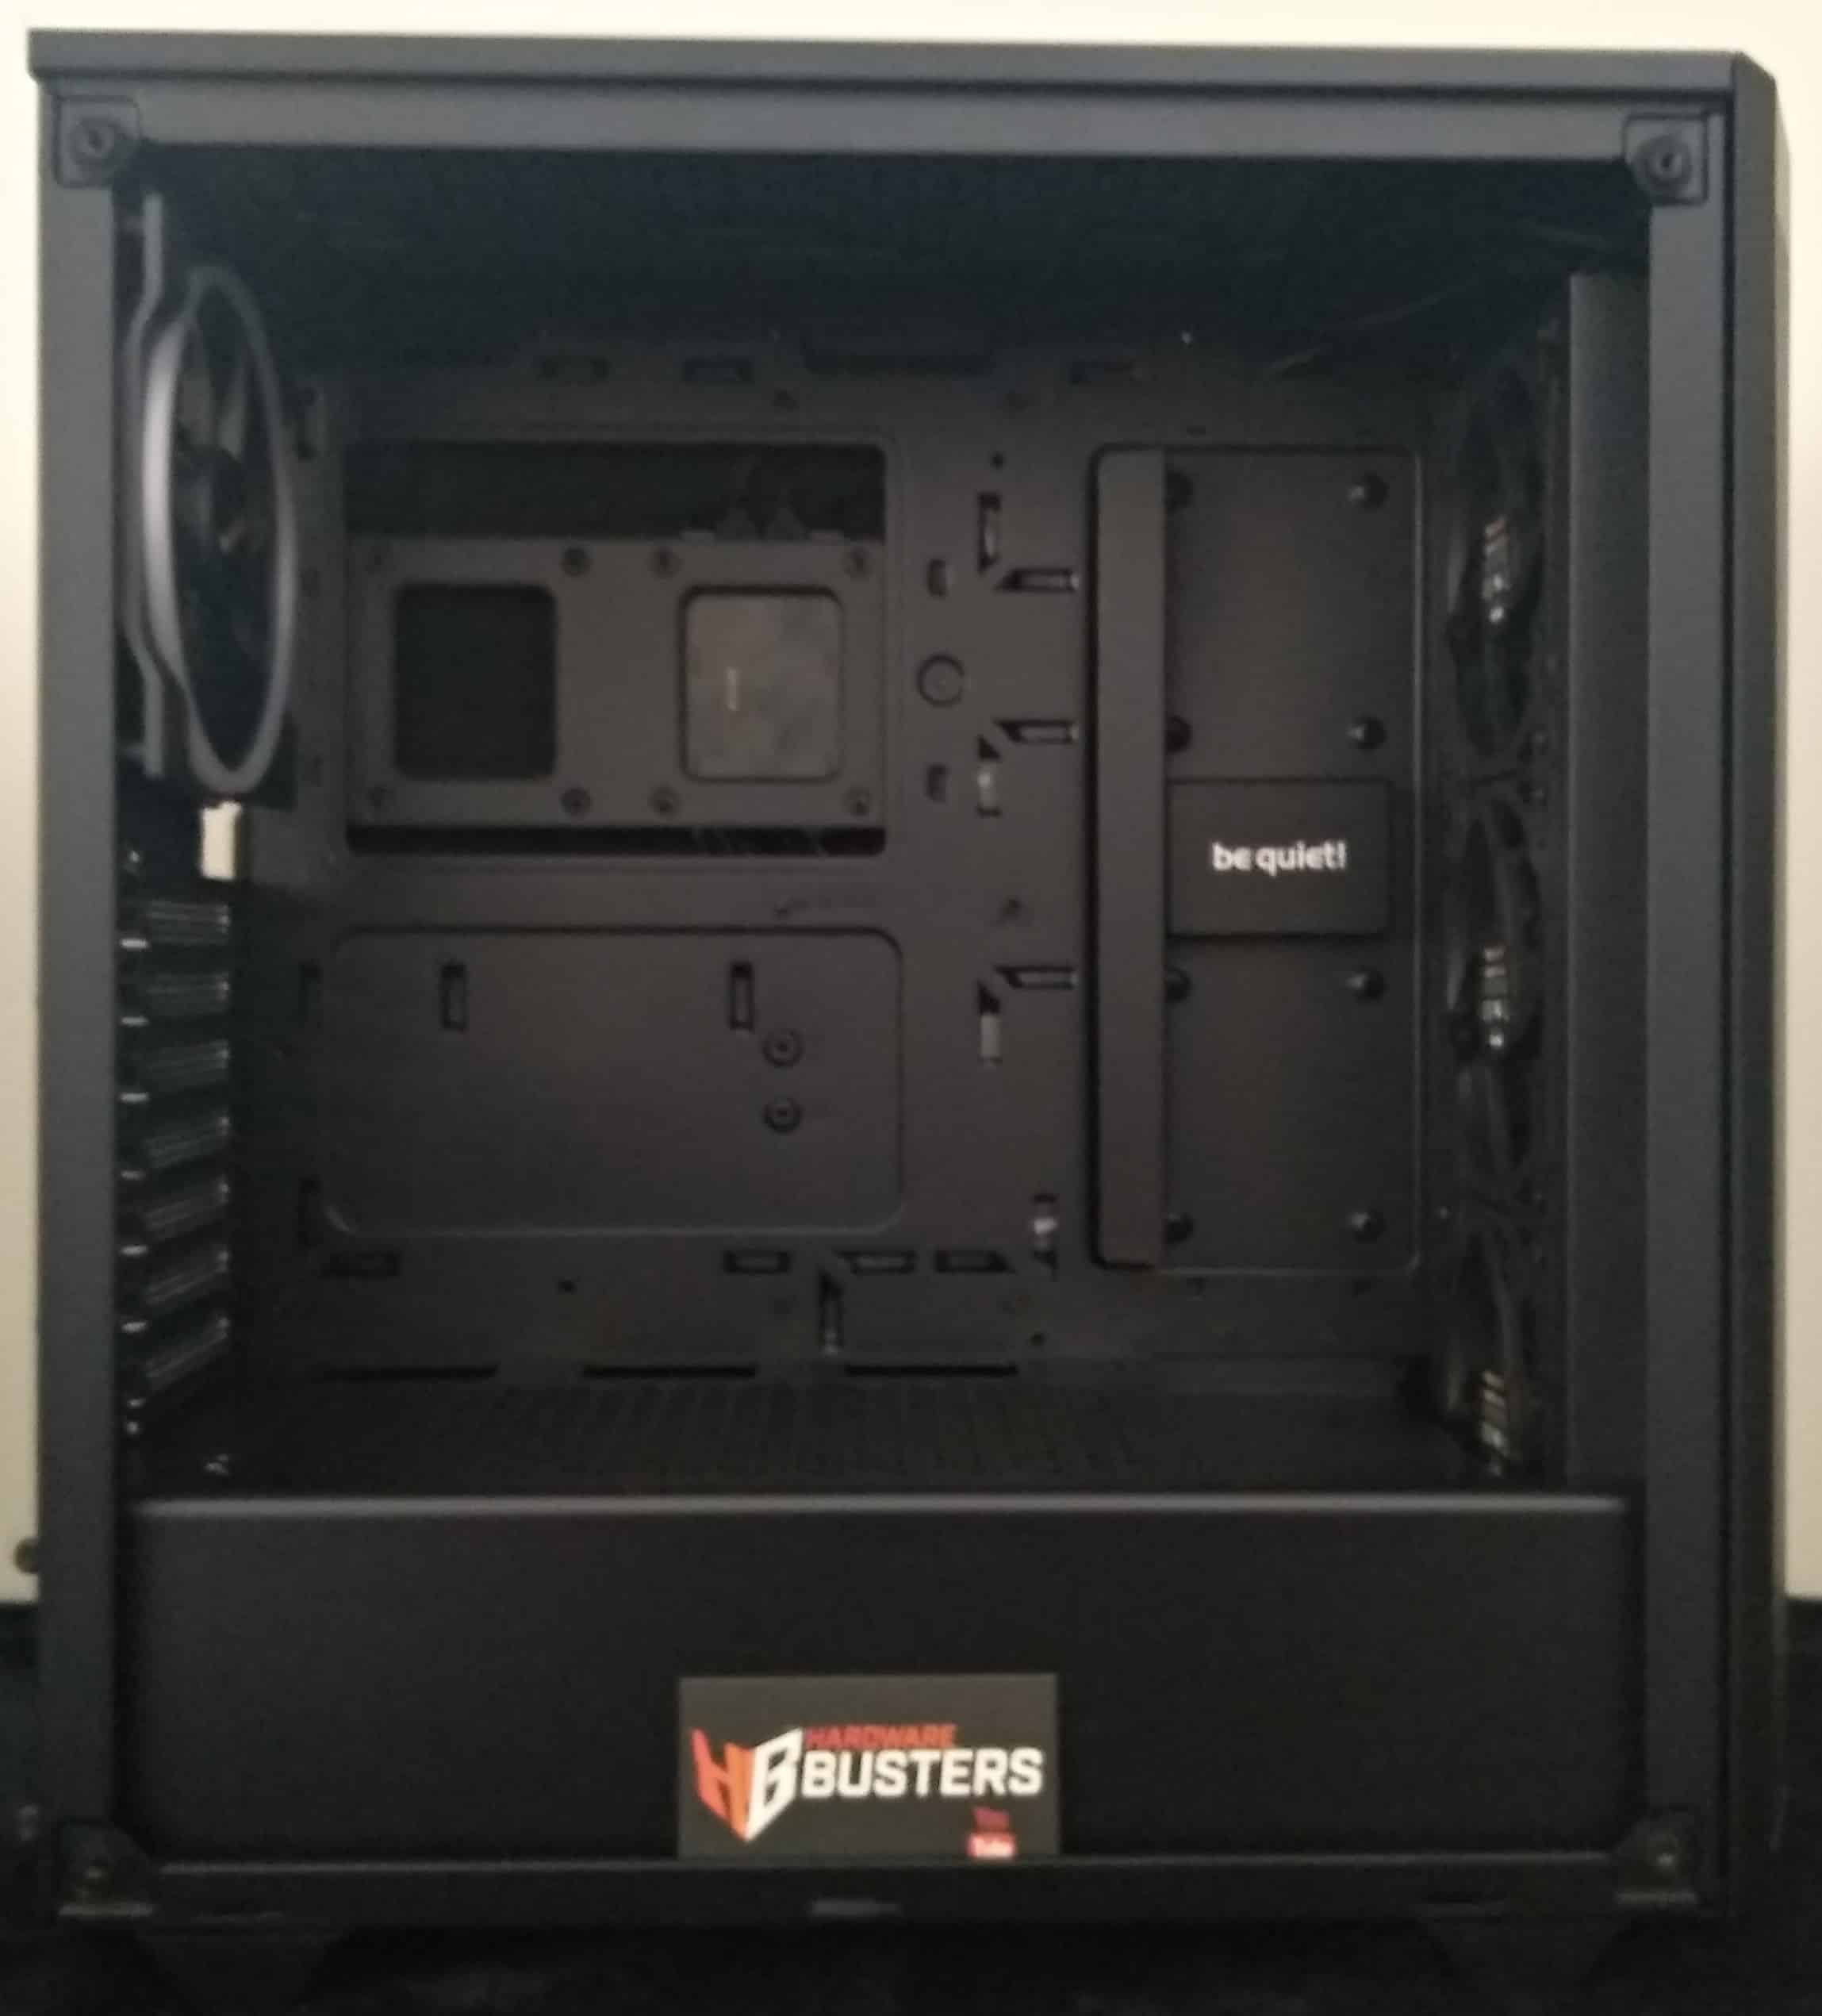 PURE BASE 500DX  Black silent essential PC cases from be quiet!